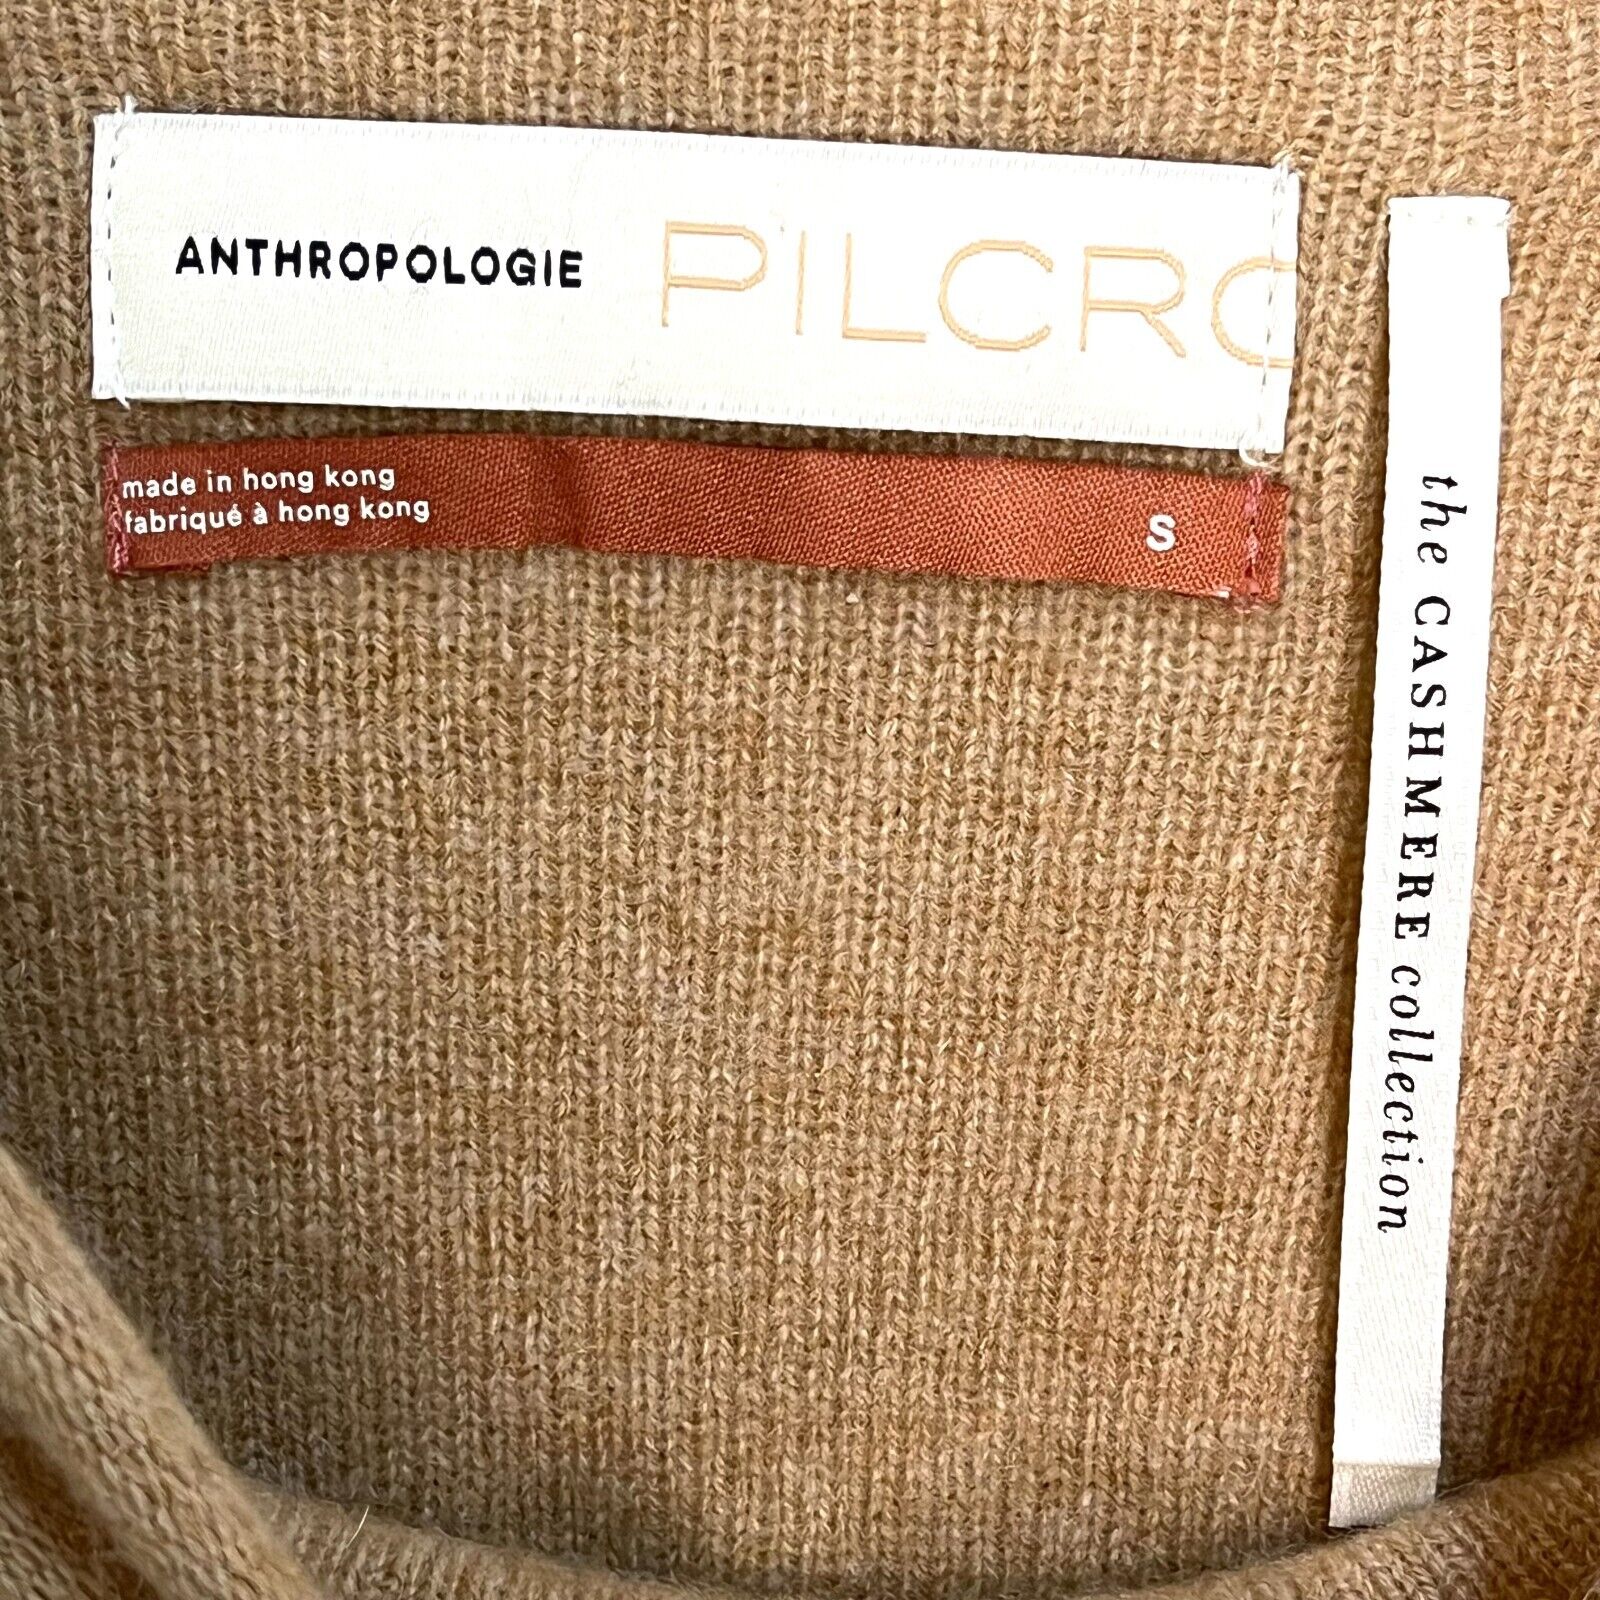 Anthropologie Pilcro The Alani Cashmere Mock-Neck Sweater In Beige Size Small